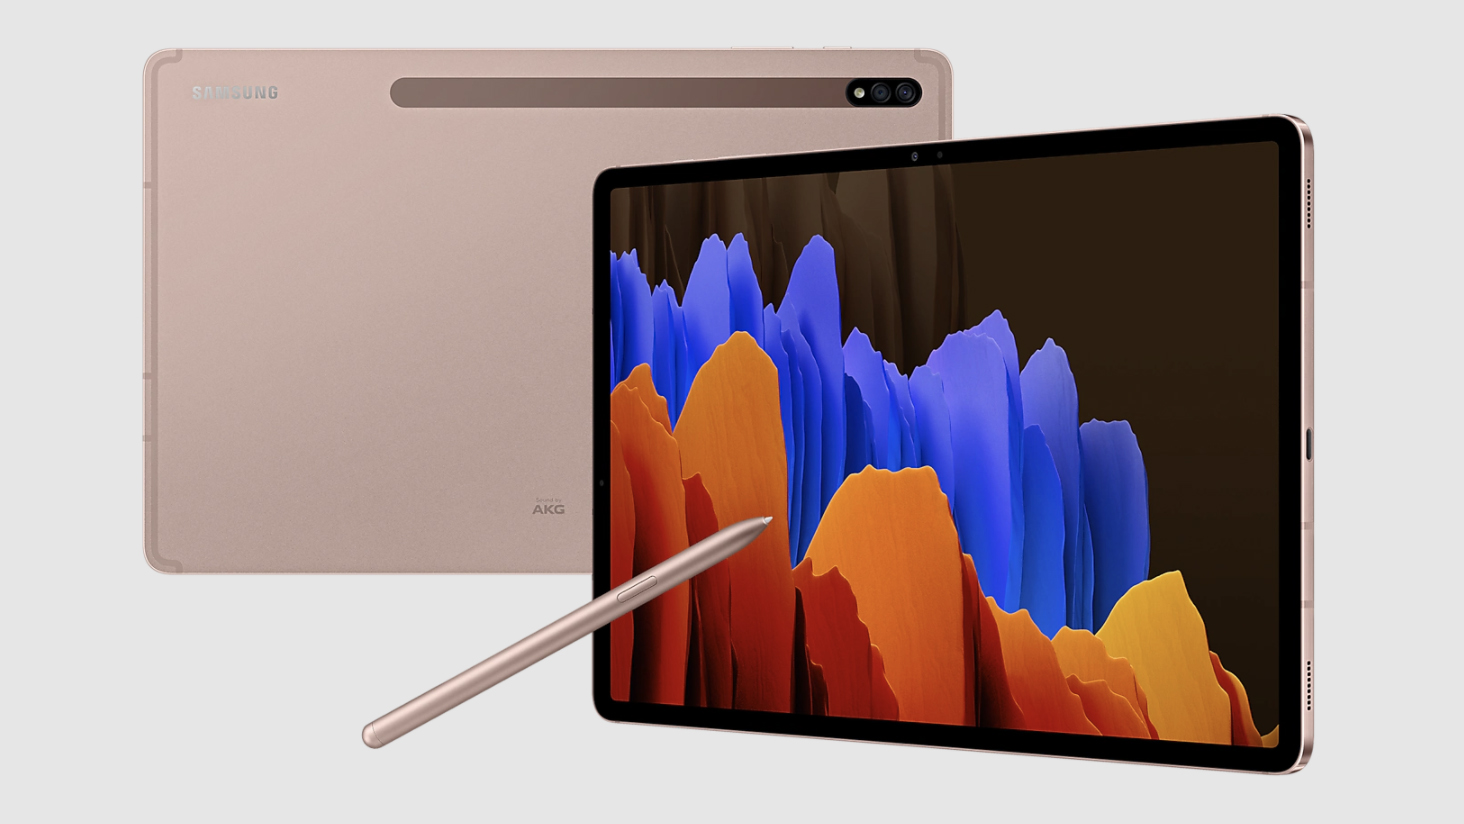 The best tablets with a stylus pen, a photo of a Samsung Tab 7 plus, the best tablet with a stylus for Android users on a budget